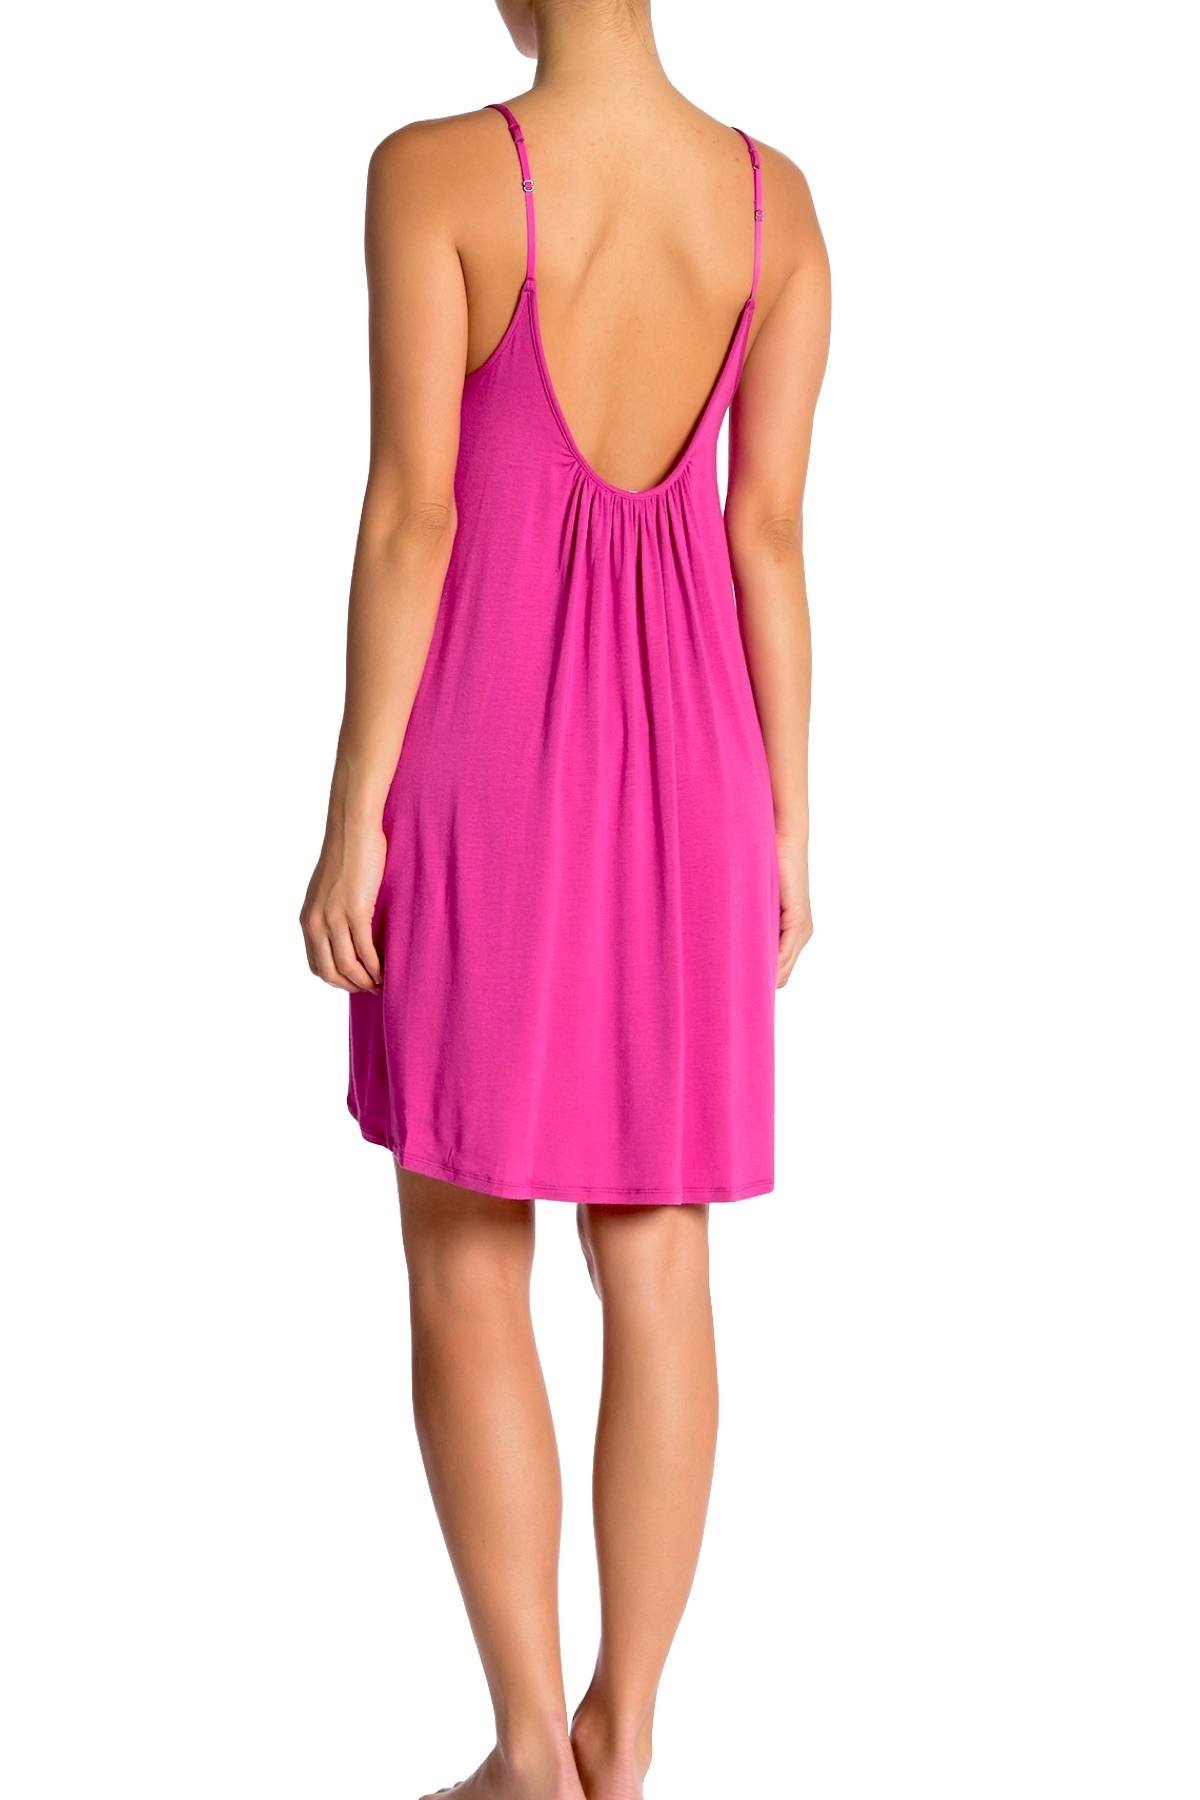 Josie by Natori Tees Chemise in Wild Orchid